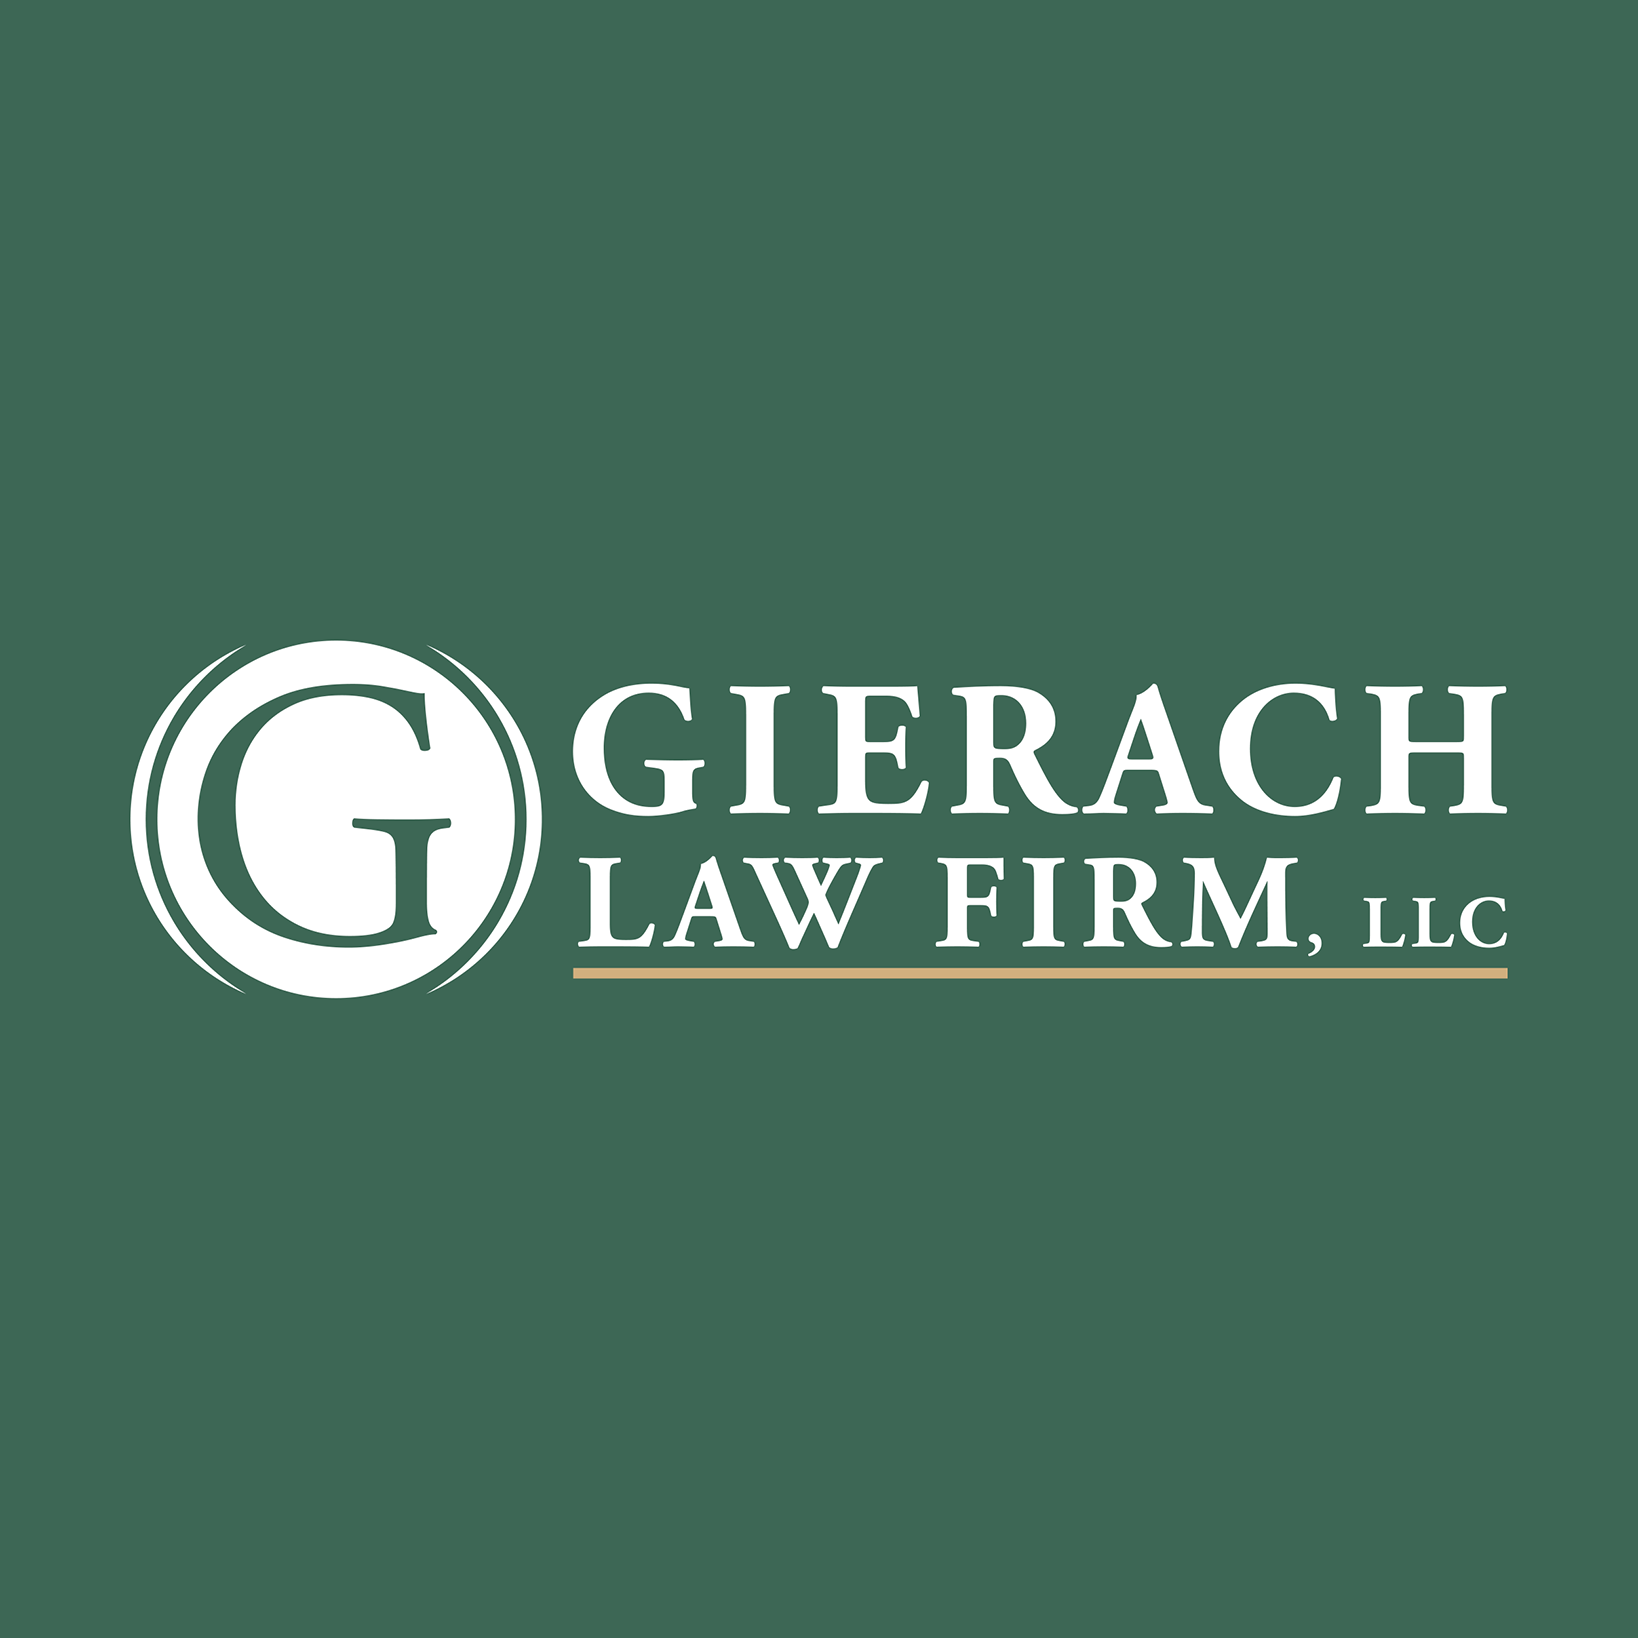 Gierach Law Firm, LLC Profile Picture